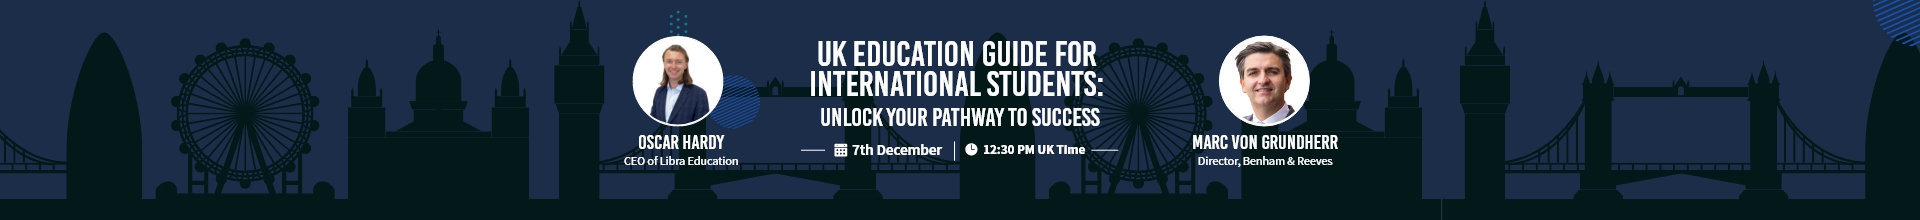  UK Education Guide for International Students: Unlock Your Pathway to Success